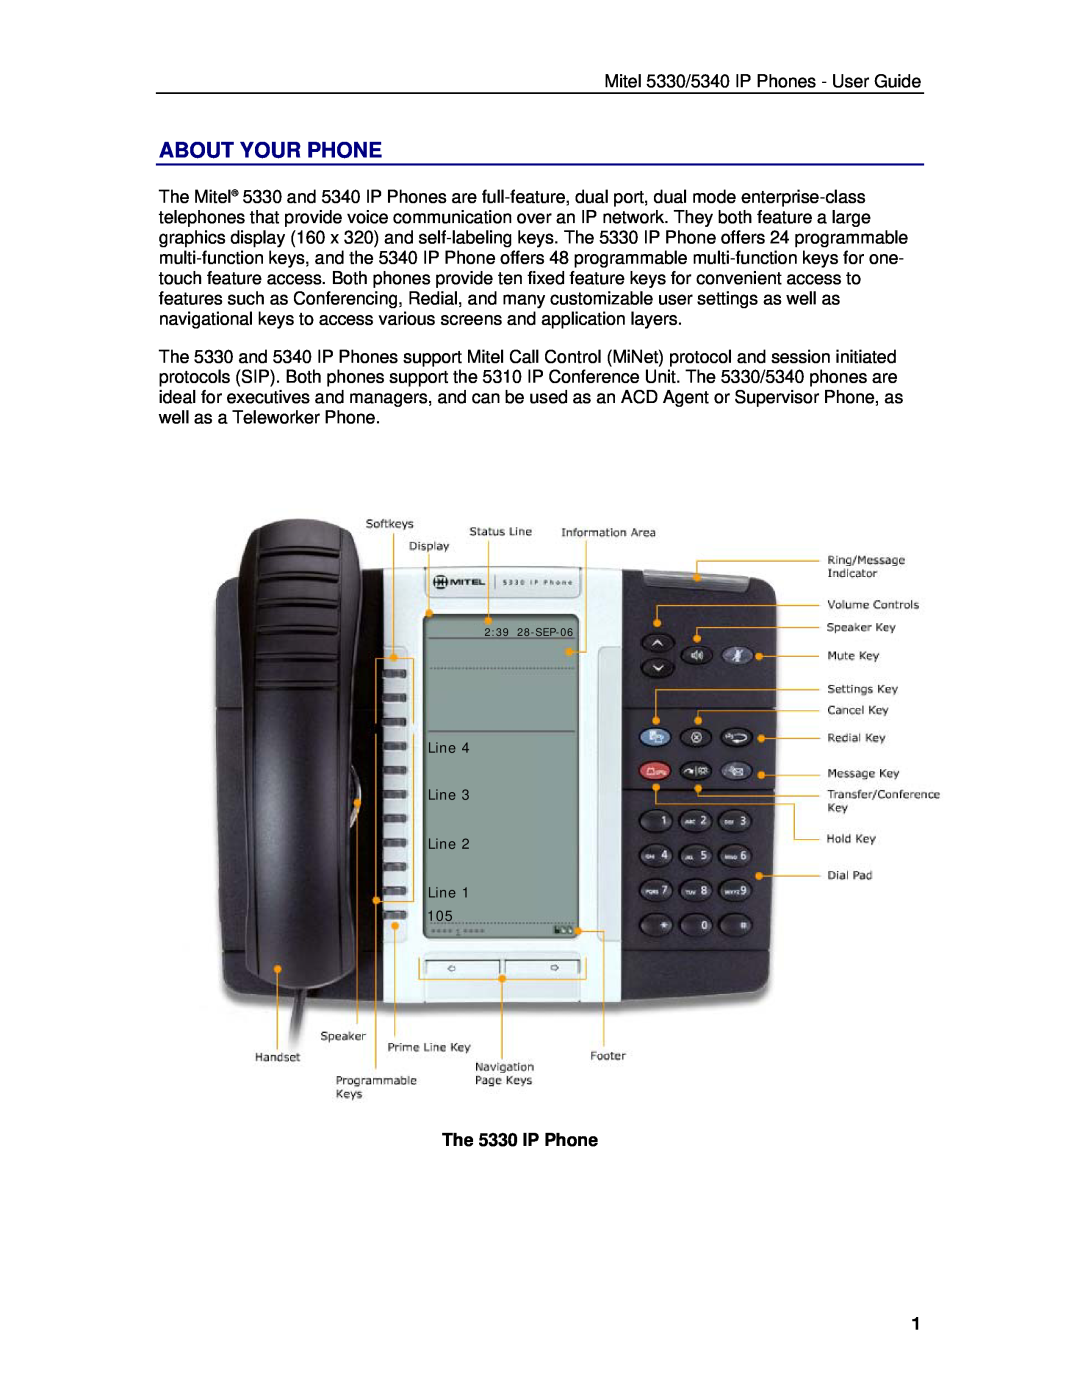 Mitel manual About Your Phone, The 5330 IP Phone 